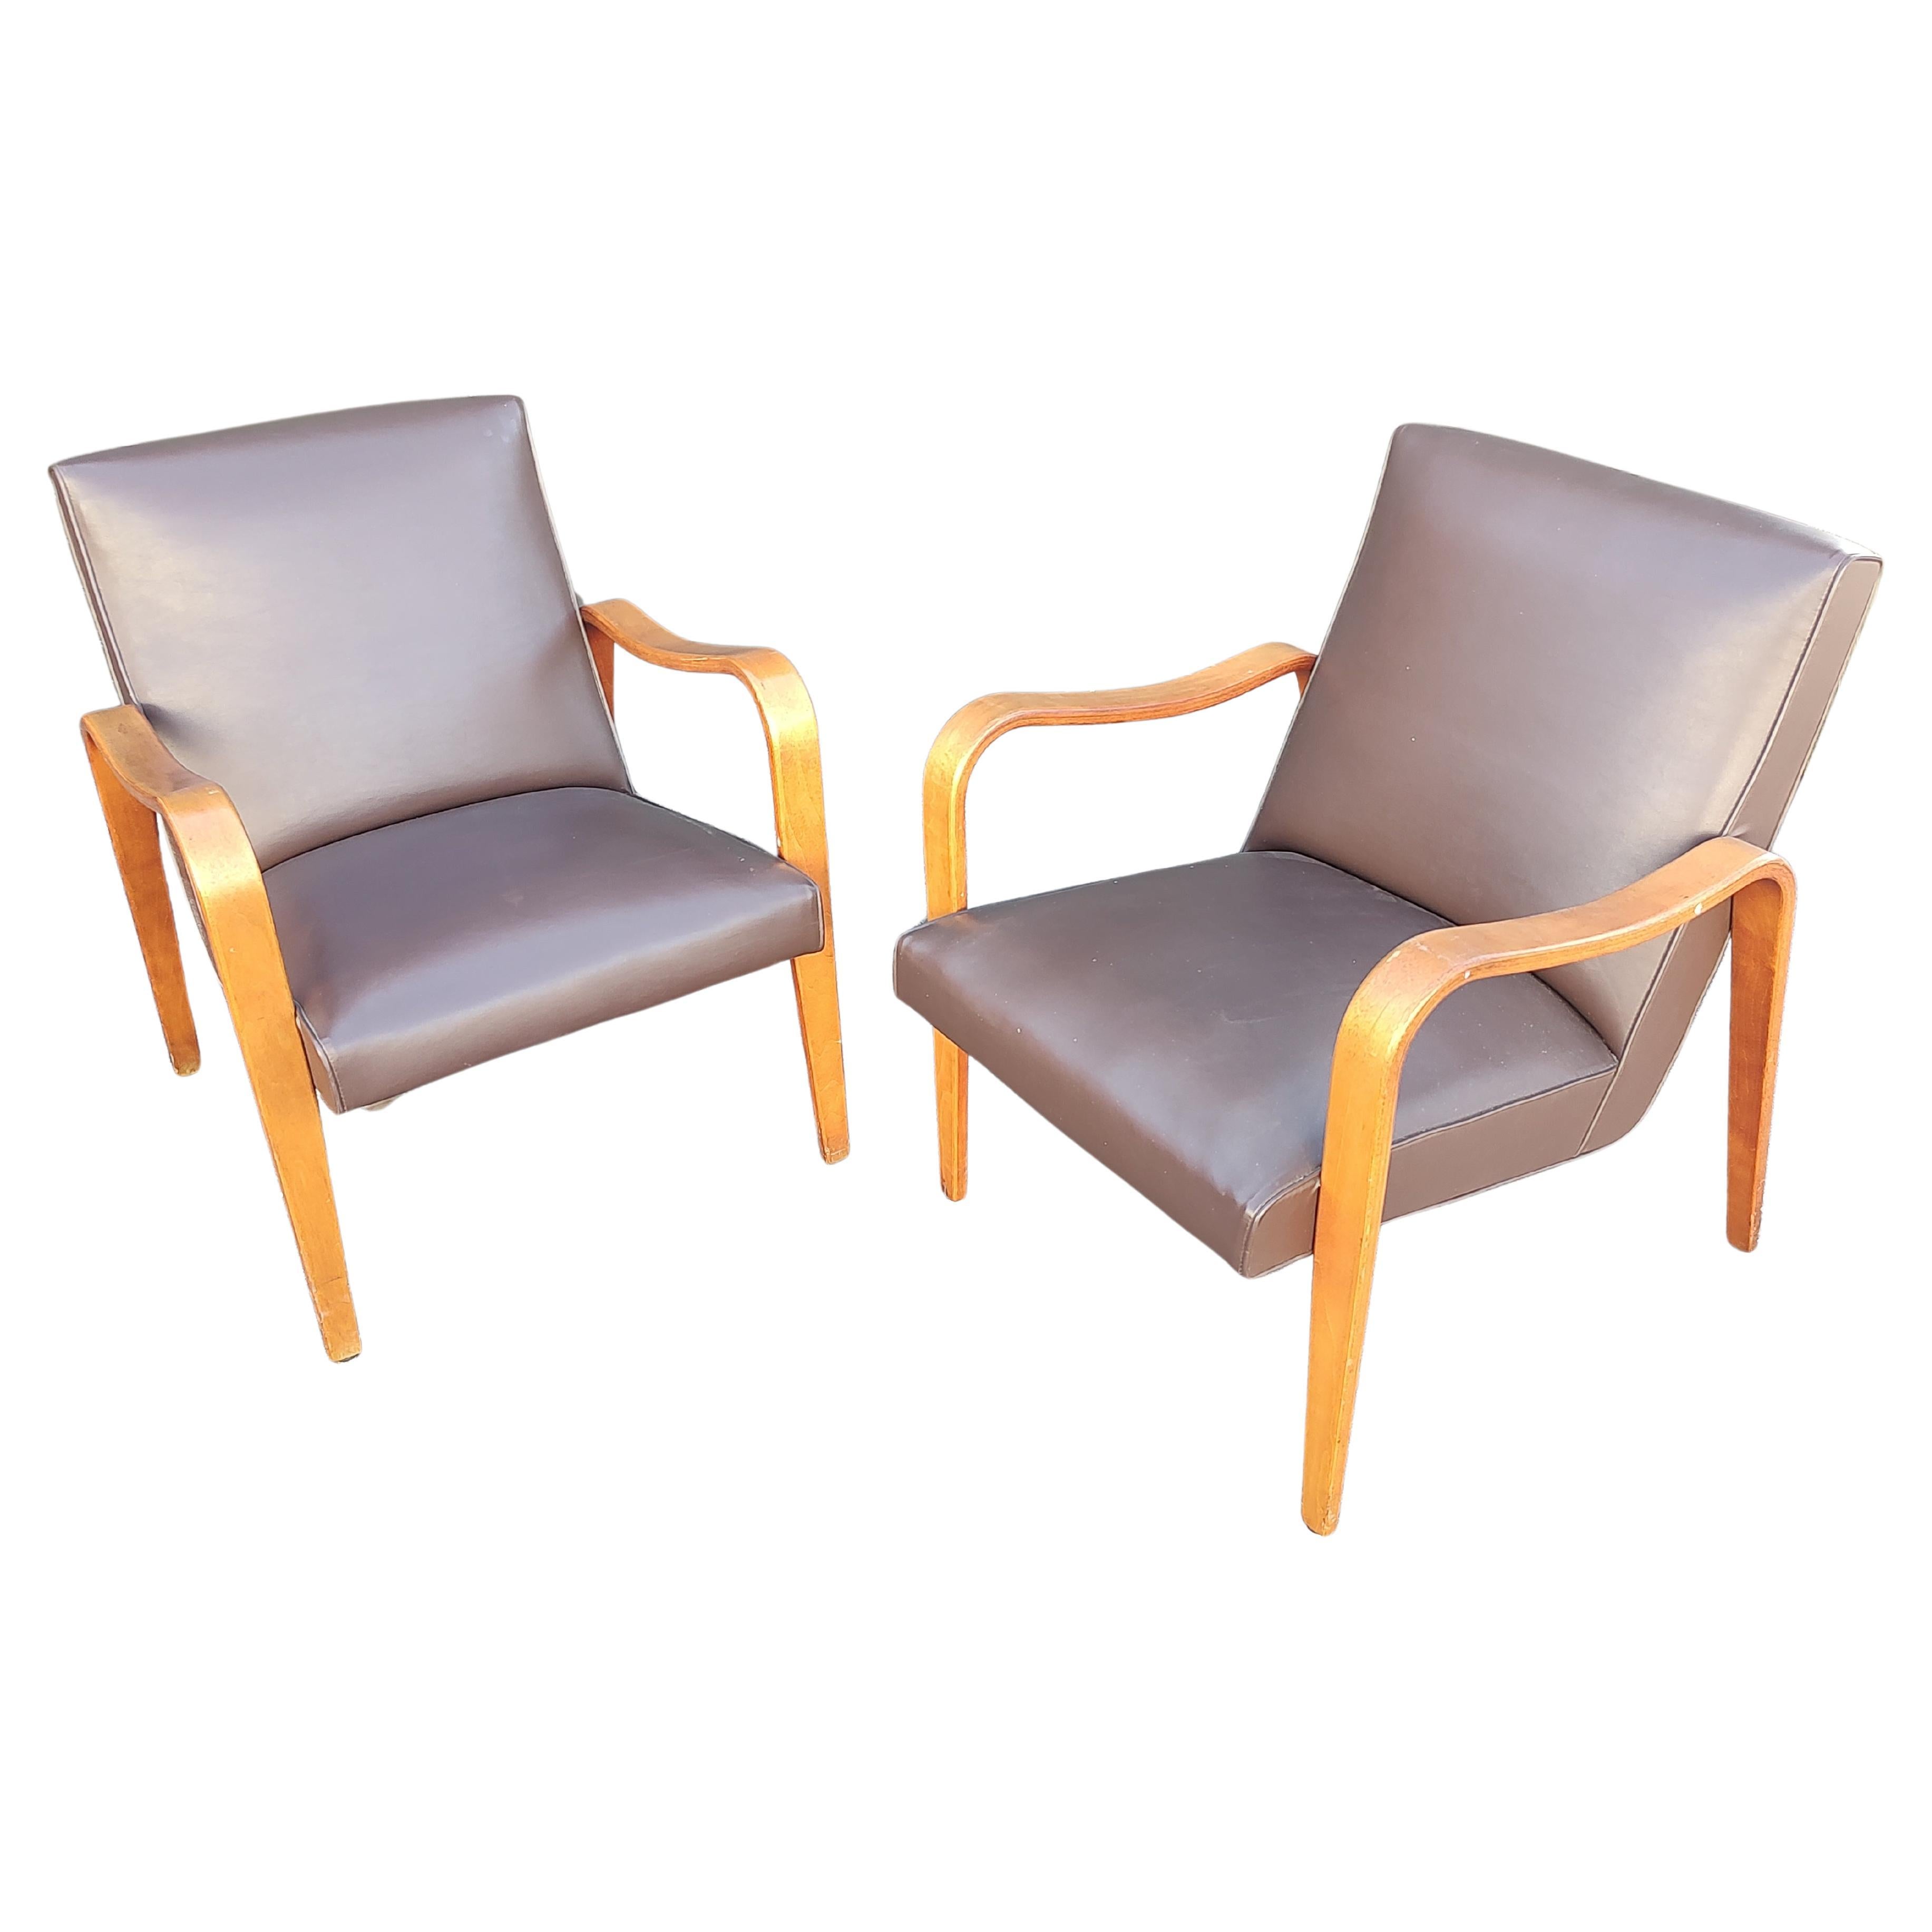 Mid Century Modern Sculptural Bent Arm Lounge Chairs in Birch by Thonet For Sale